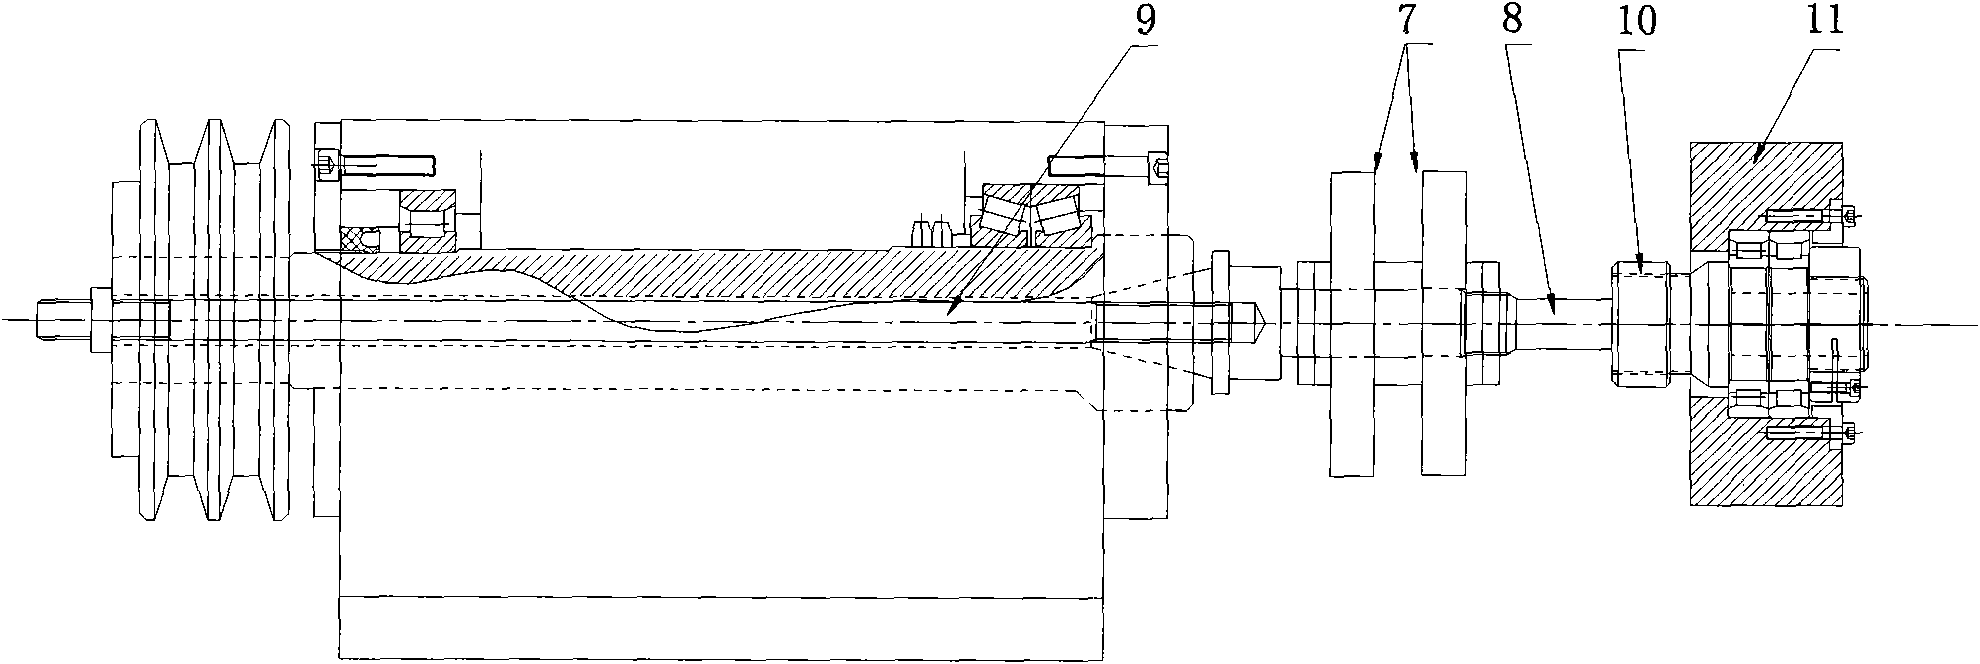 Full automatic numerical control connecting rod milling potential machine tool